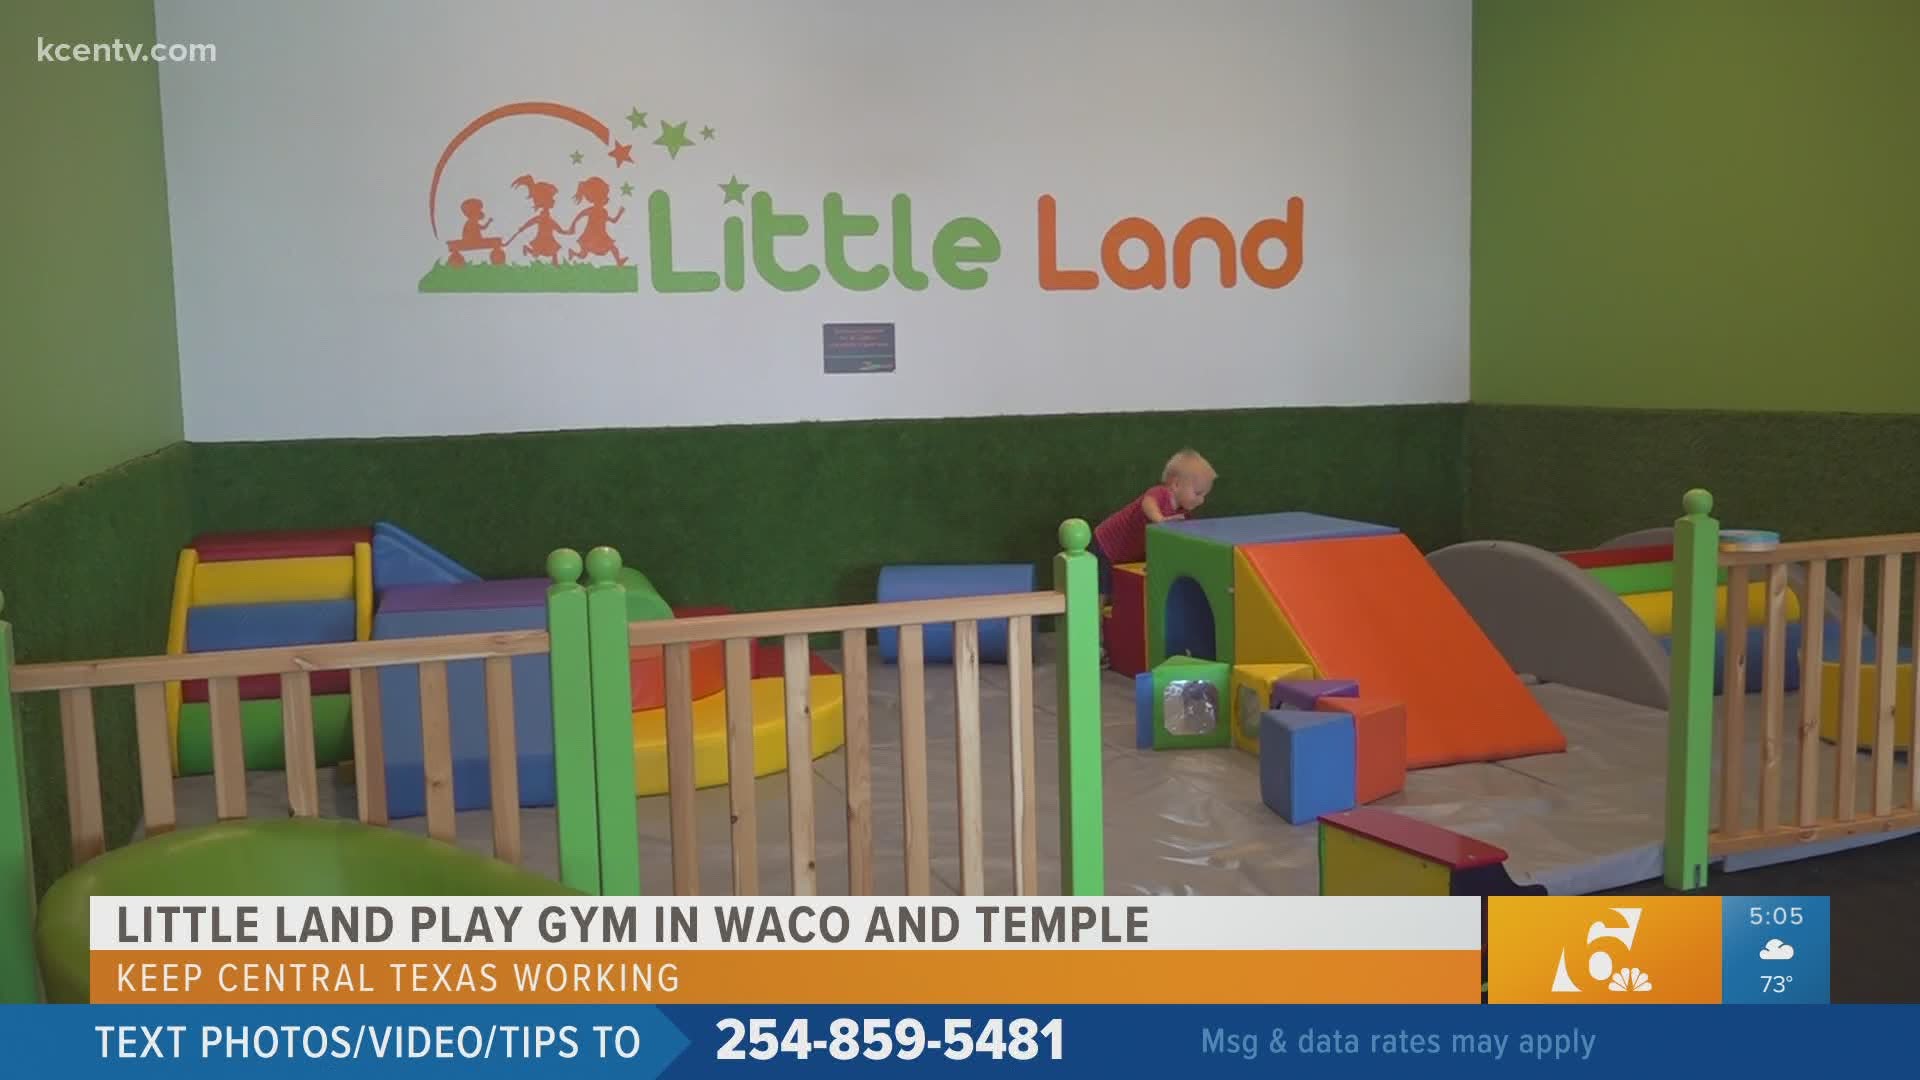 We want to keep Central Texans working, so we're highlighting a local business that could use your support. This week we meet the owners of Little Land Play Gym.